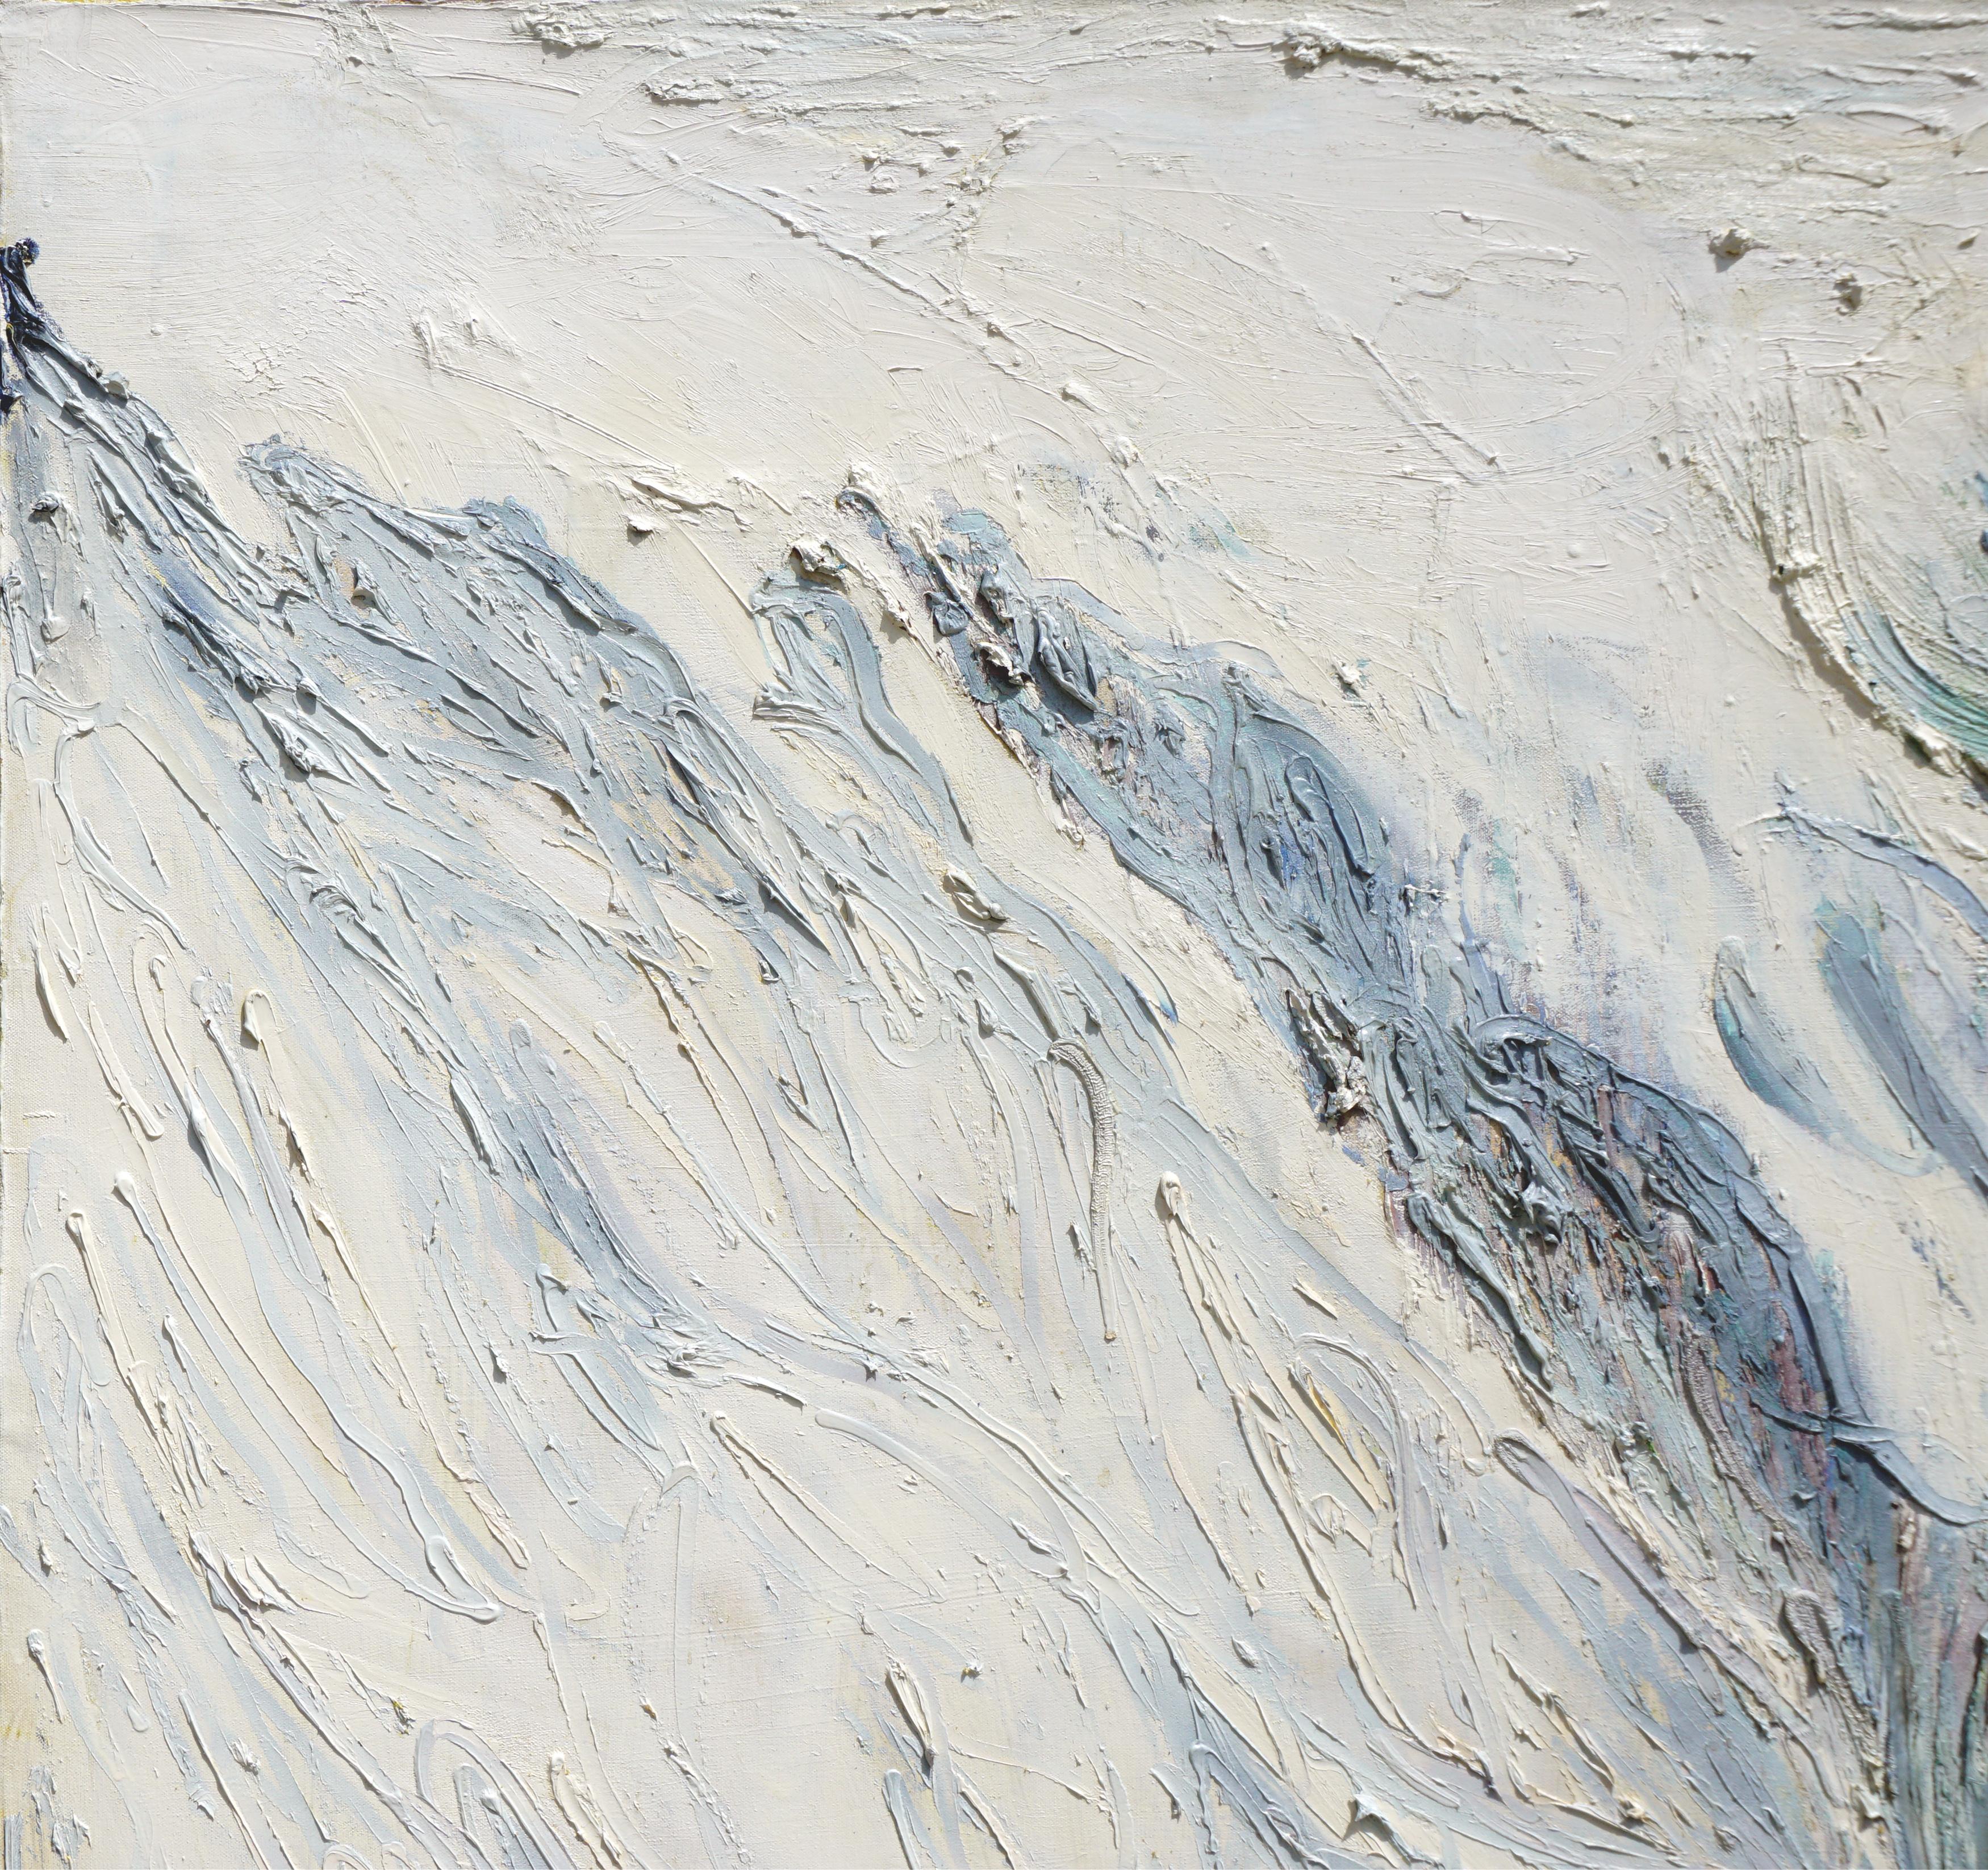 Glacier Abstract Expressionist Landscape - Gray Landscape Painting by Allie William Skelton